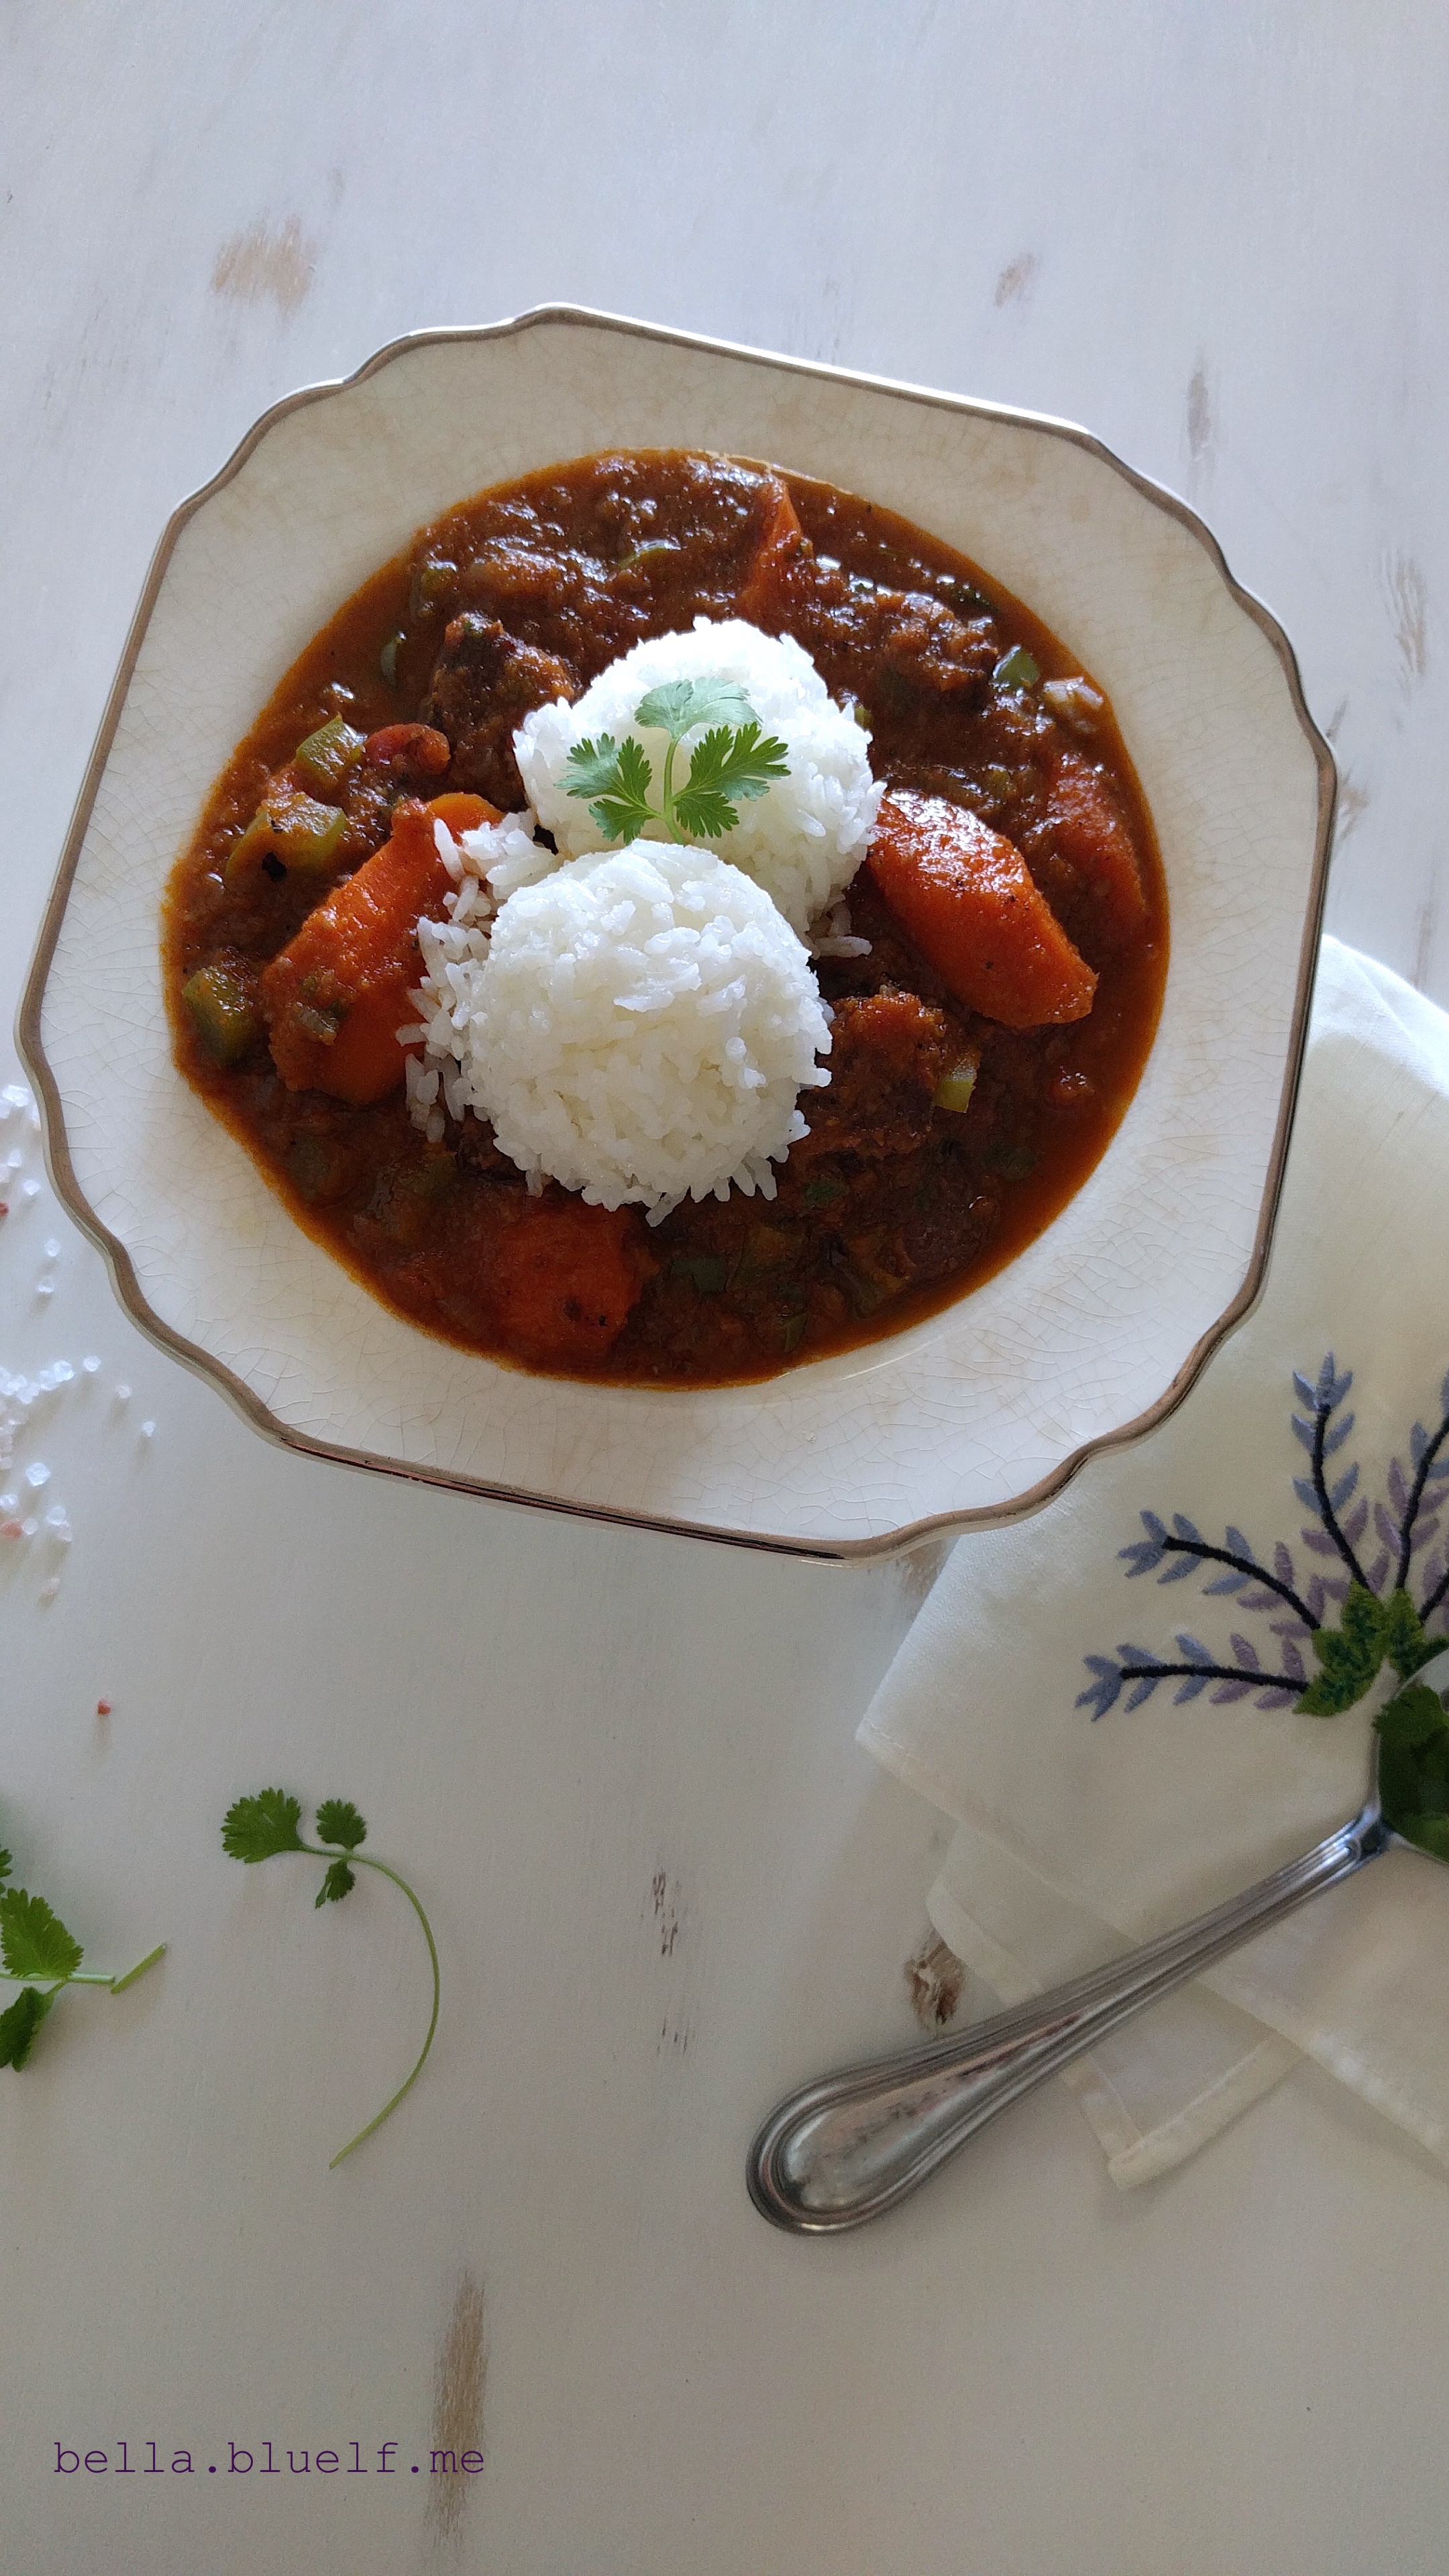 Carrots Stew with Angus Prime Beef - 2016 photo 2 by Rhônya Holman for bella.bluelf.me